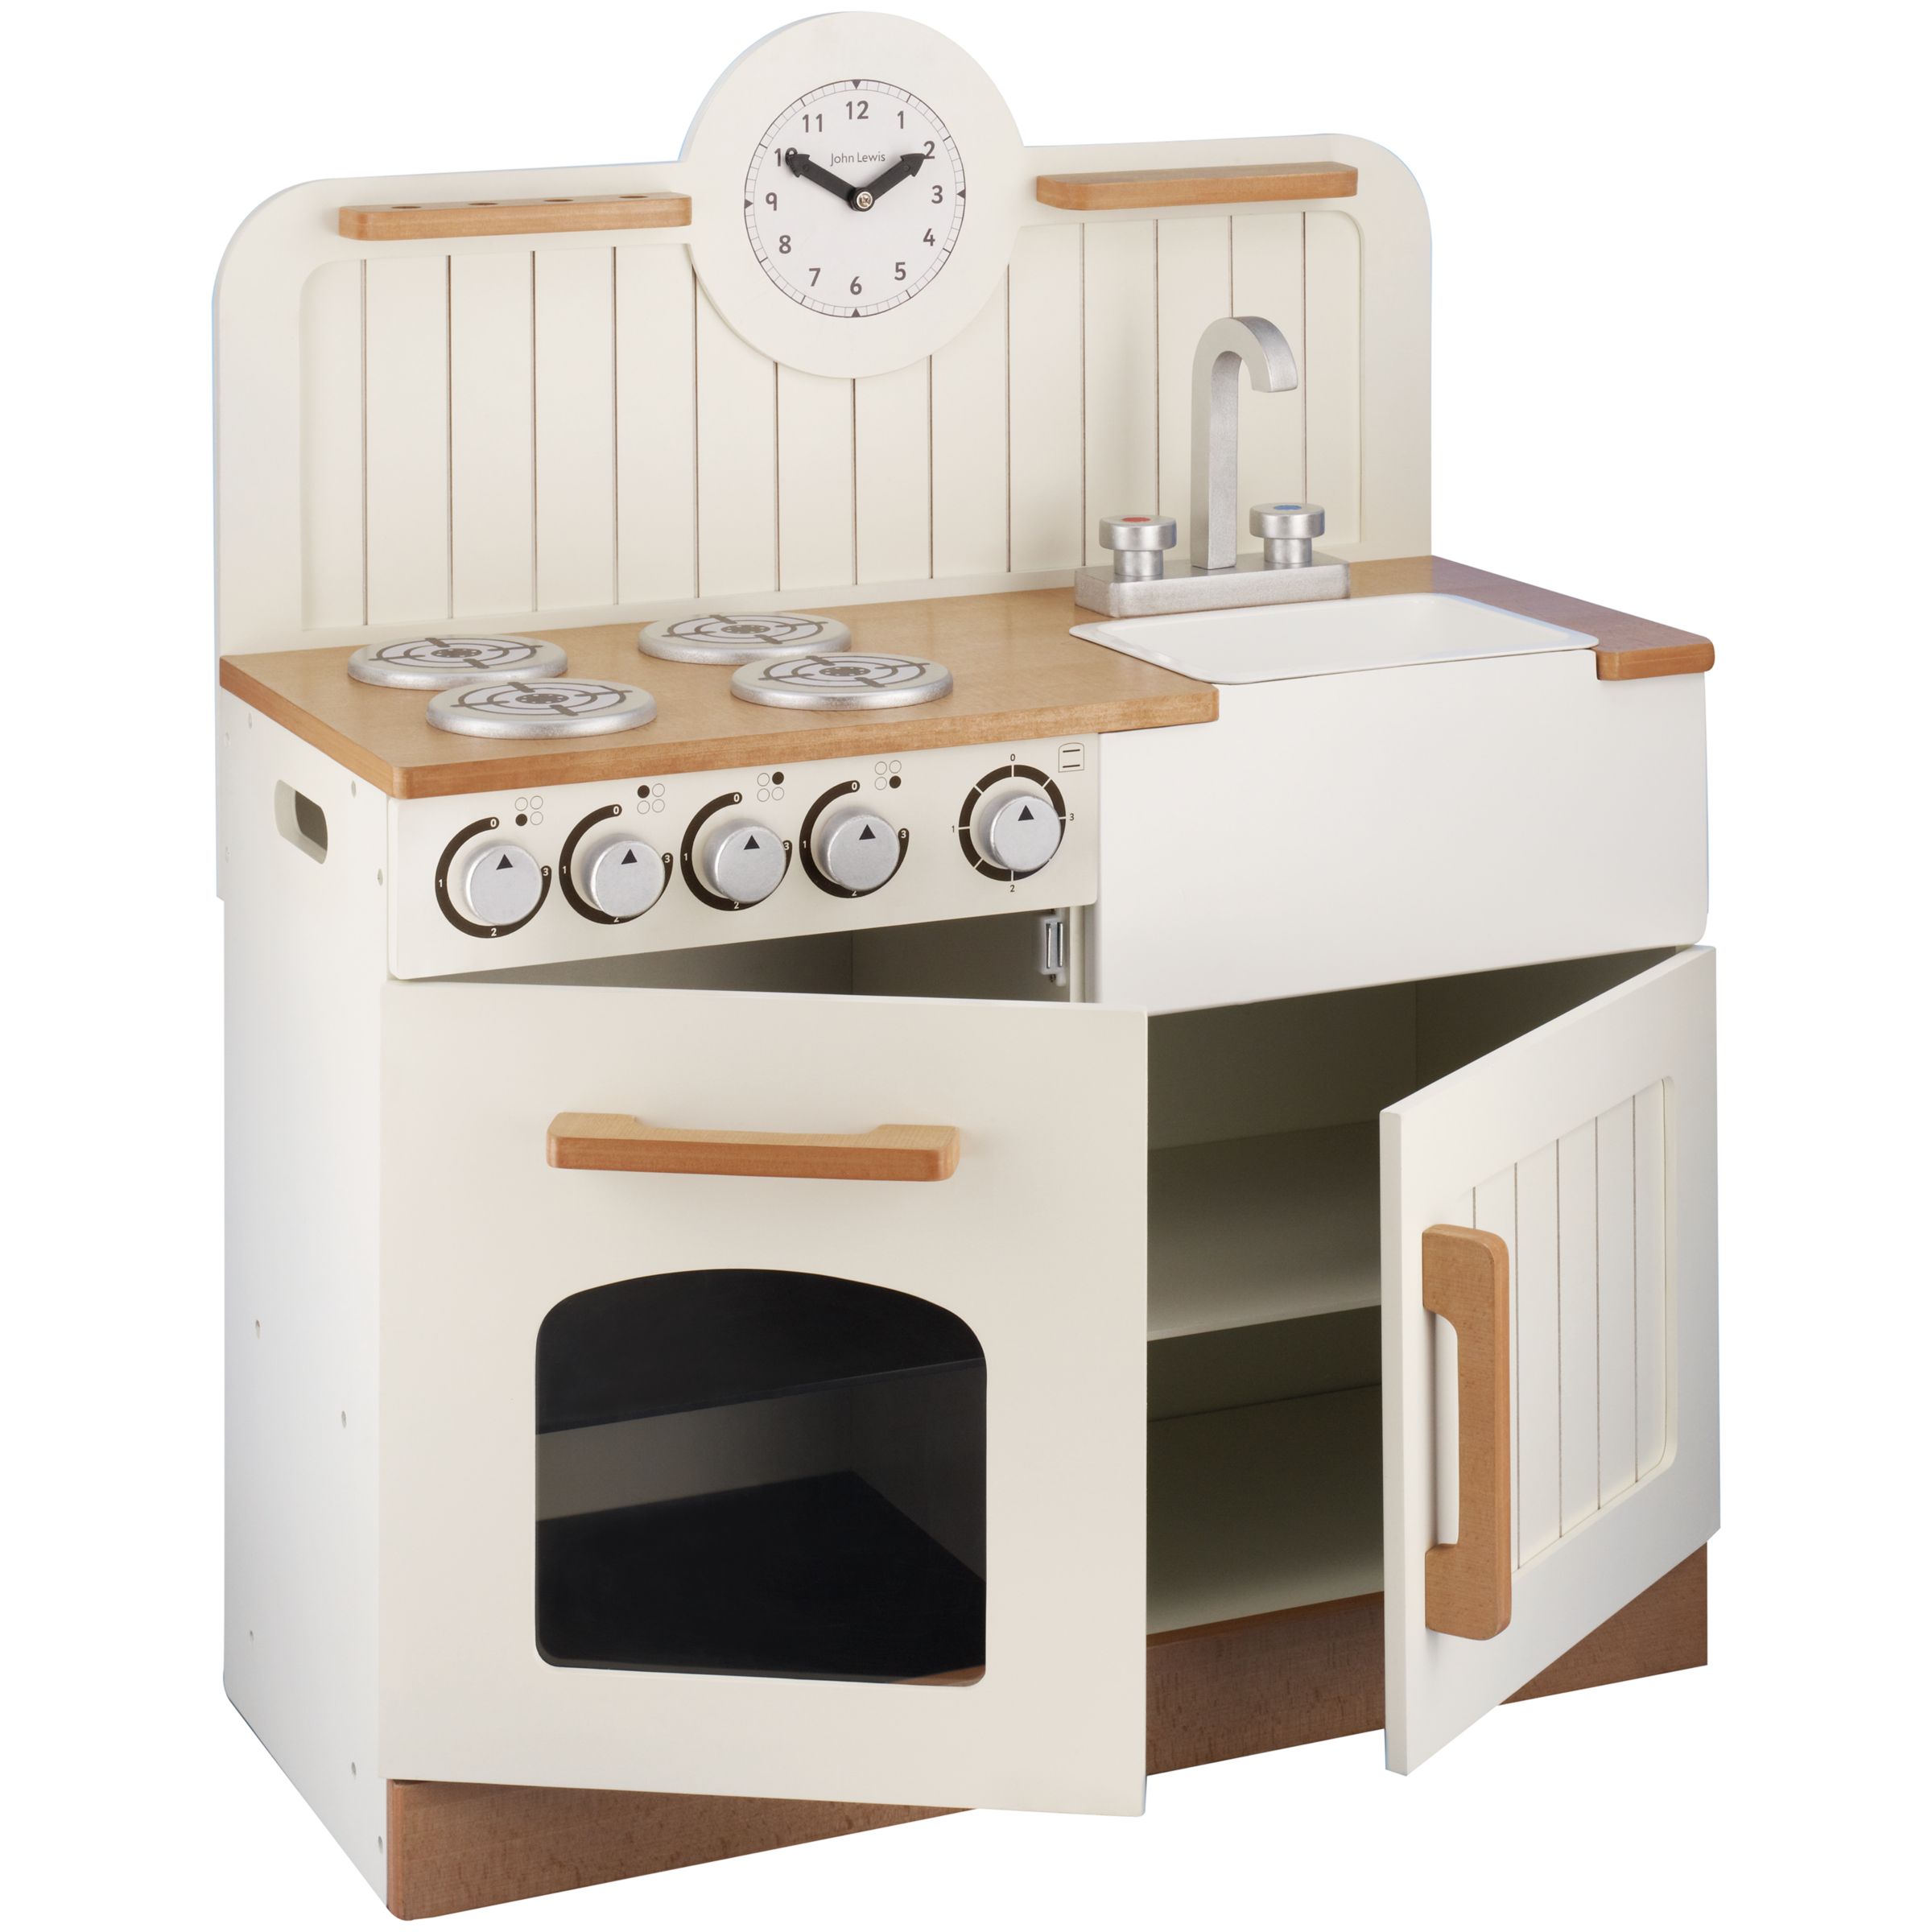 wooden play stove